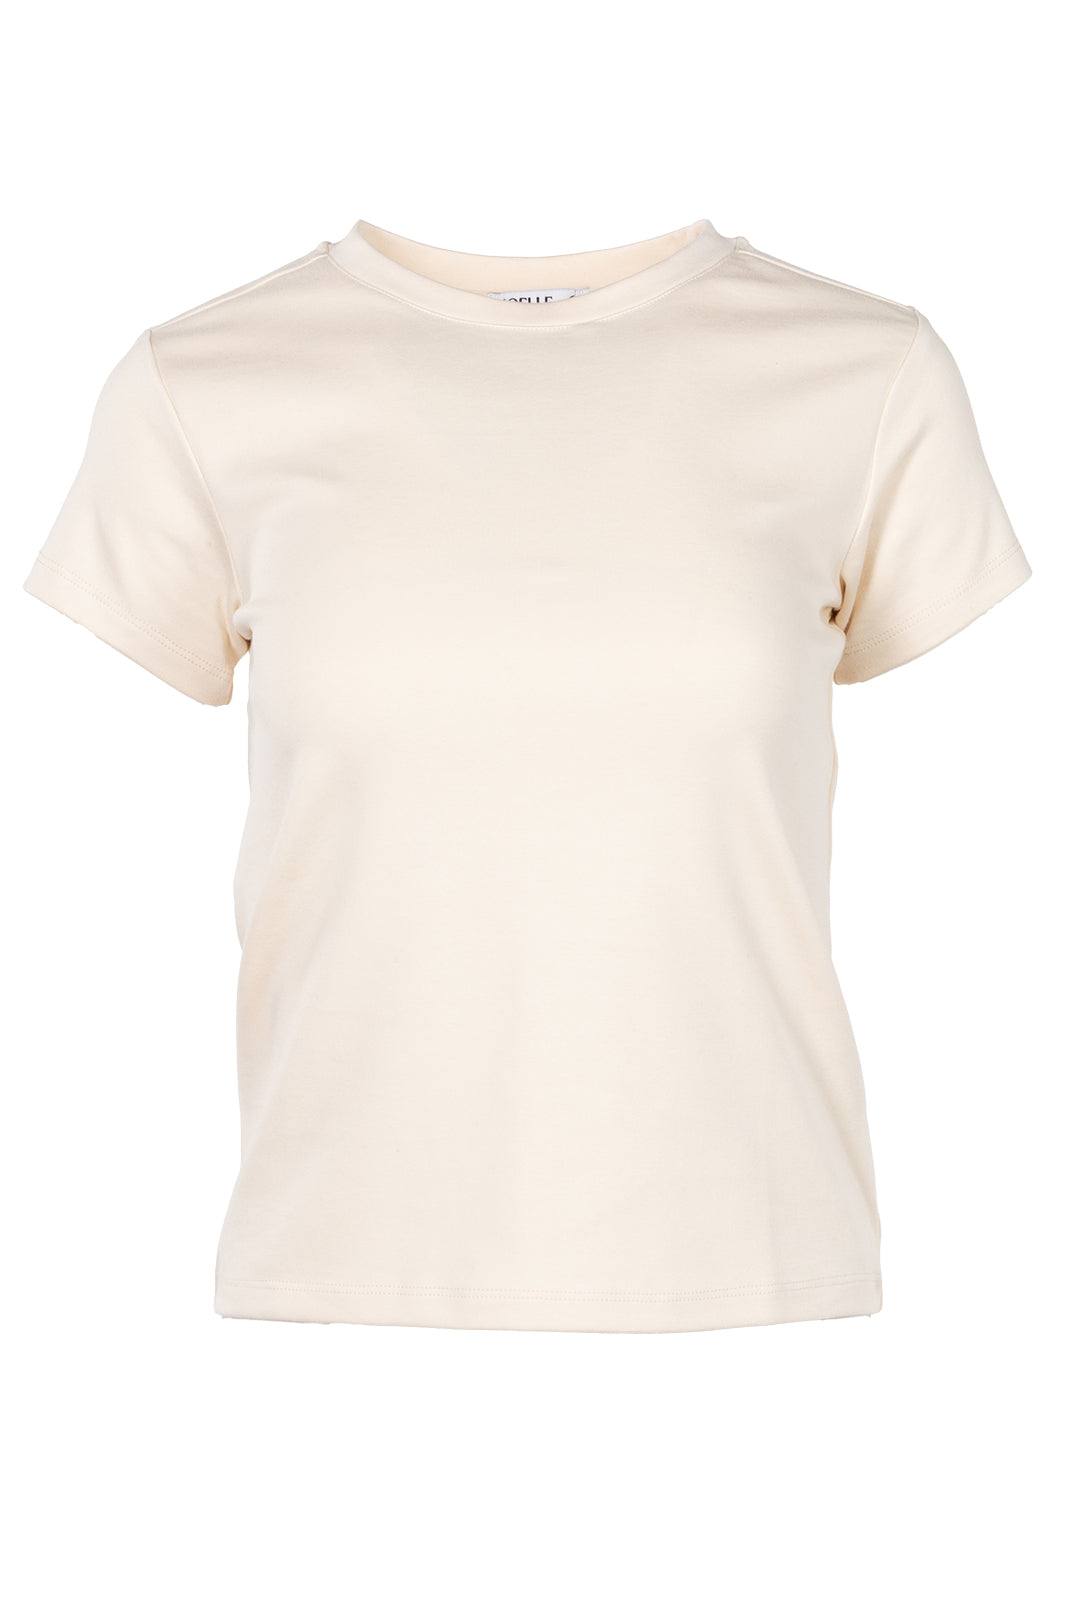 Fitted Ivory T-Shirt | Planta